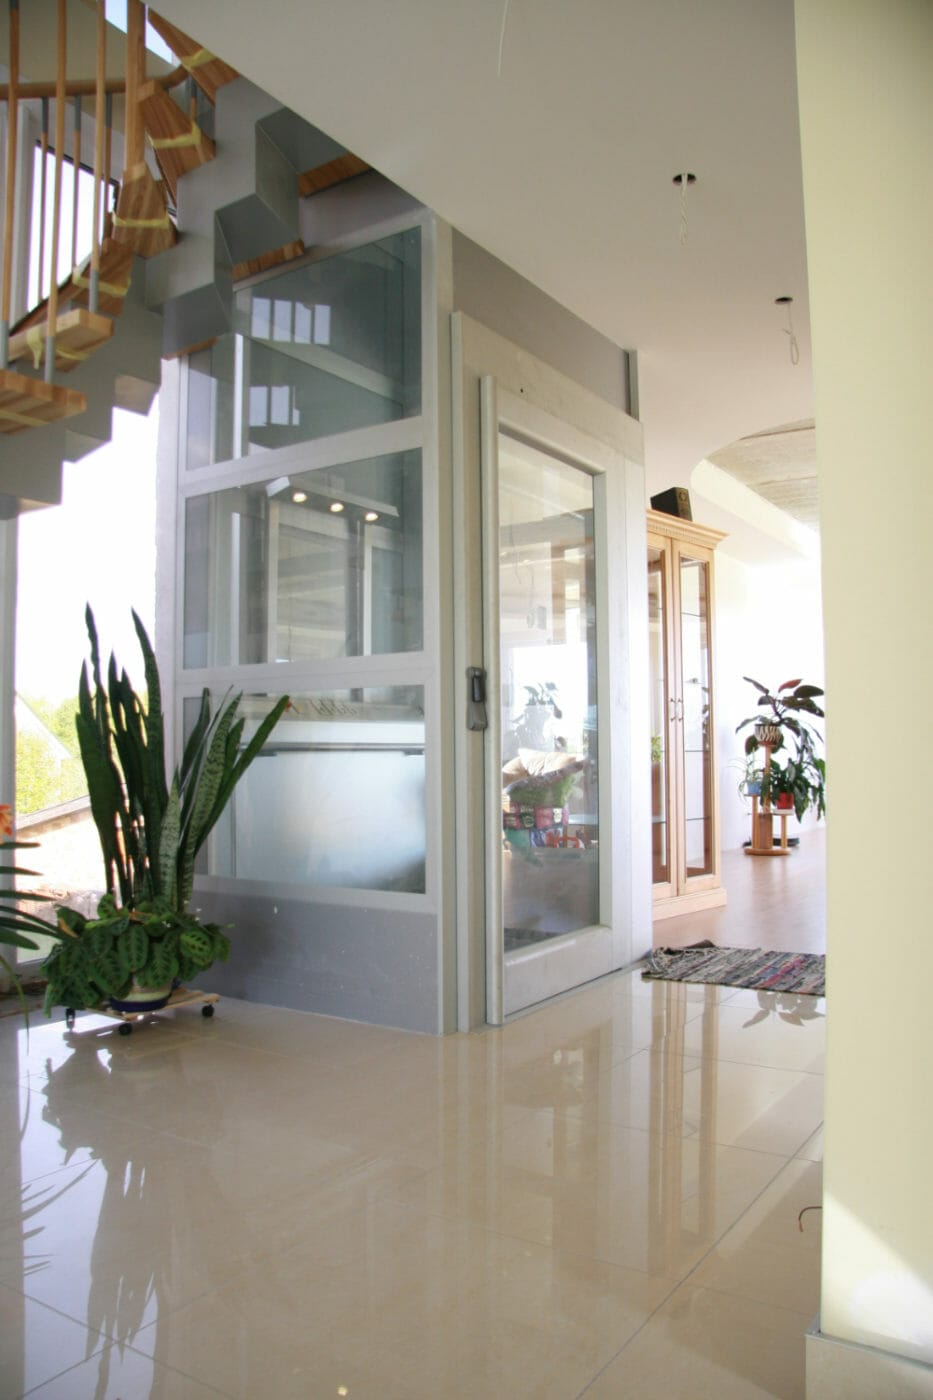 Home Lifts | Through Floor Lifts | Domestic Lifts